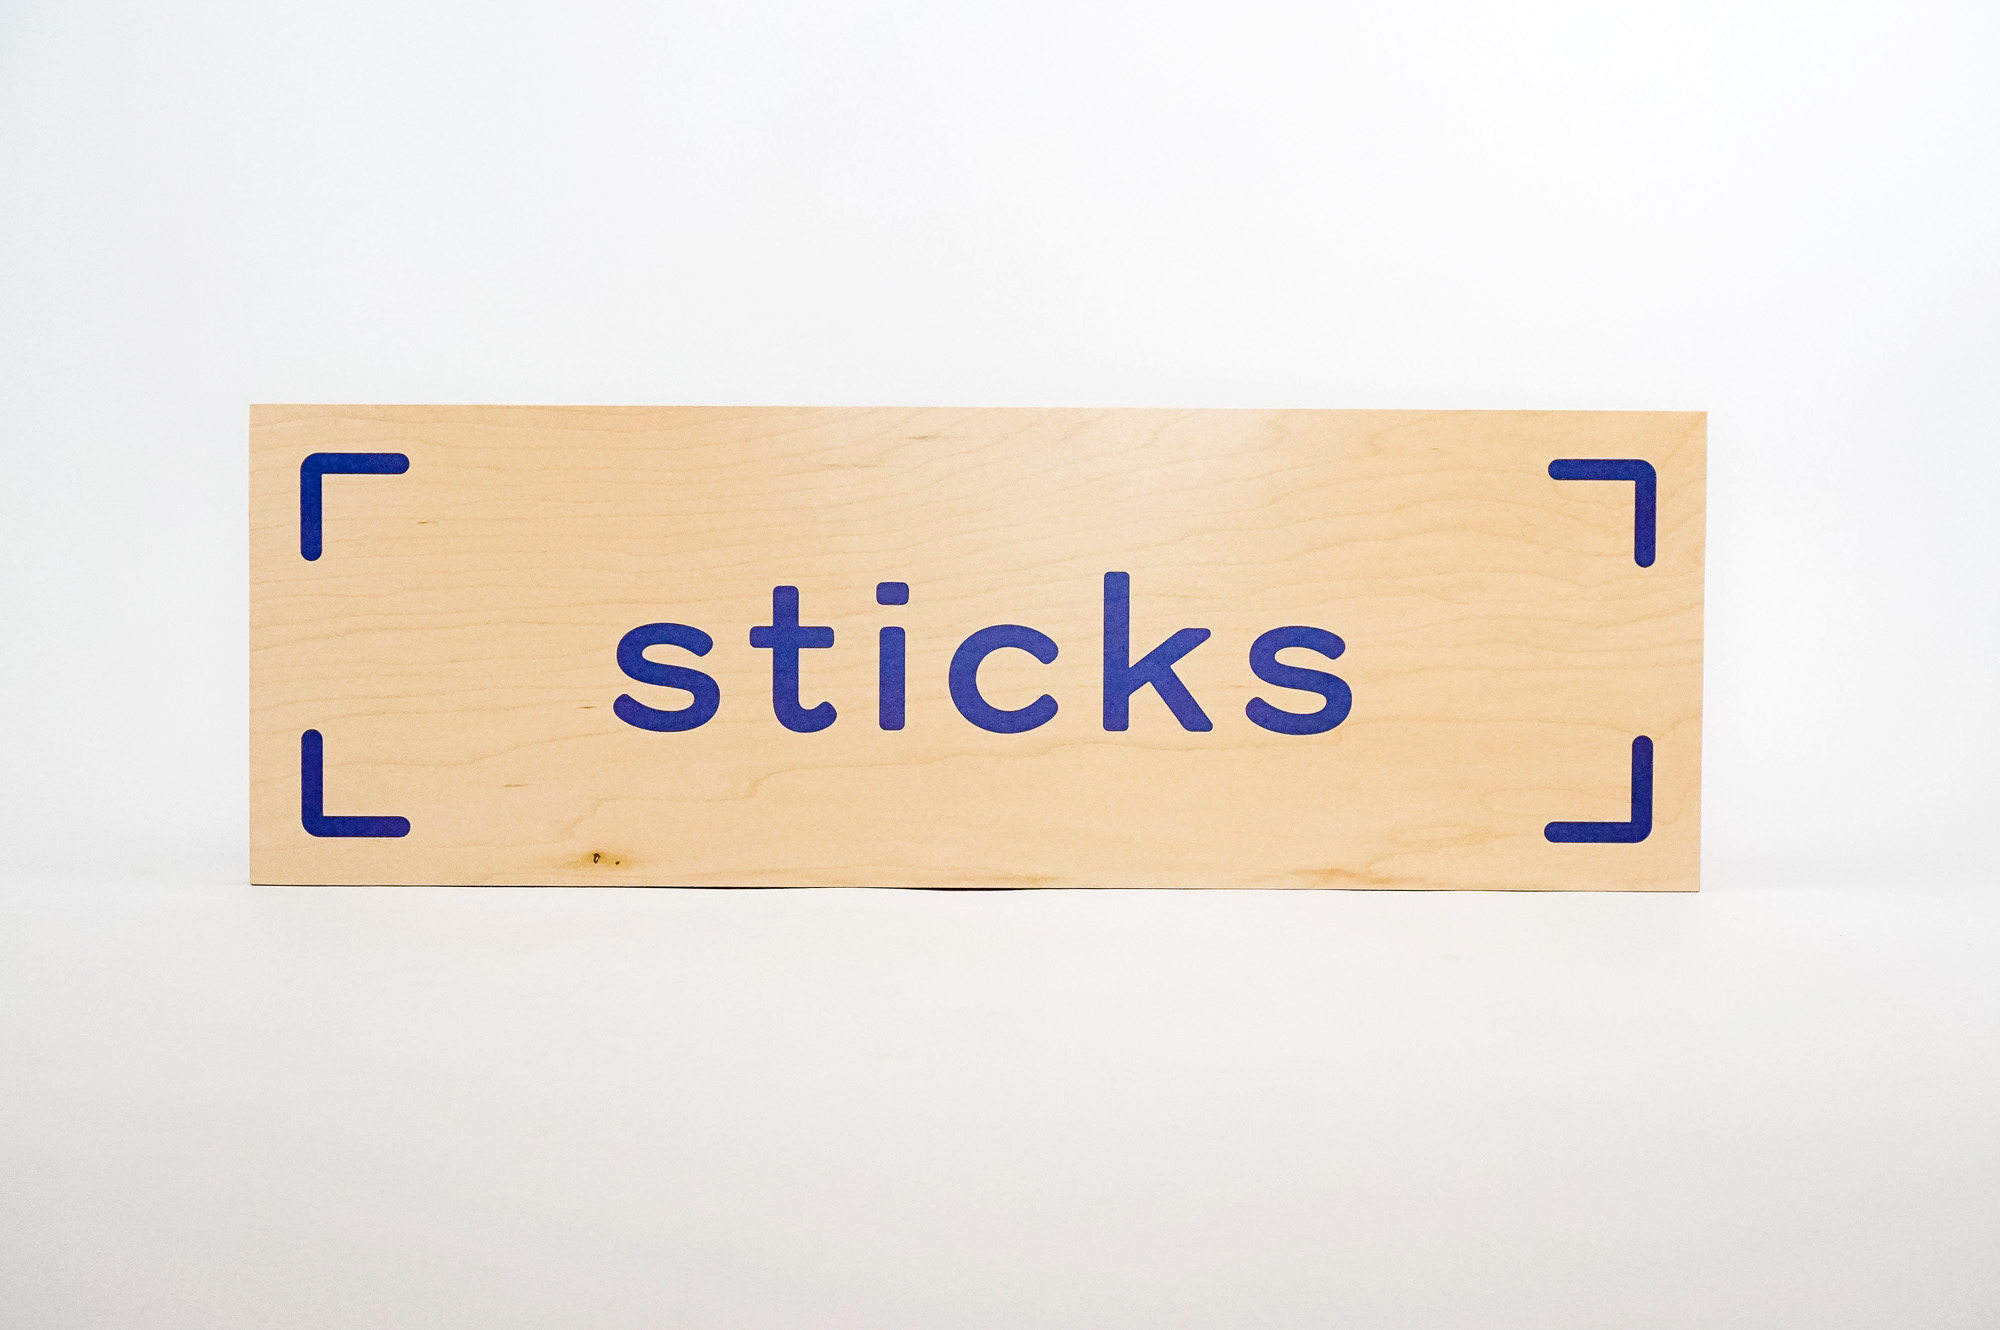 Light wood event sign with blue logo for Sticks, a kidswear company.